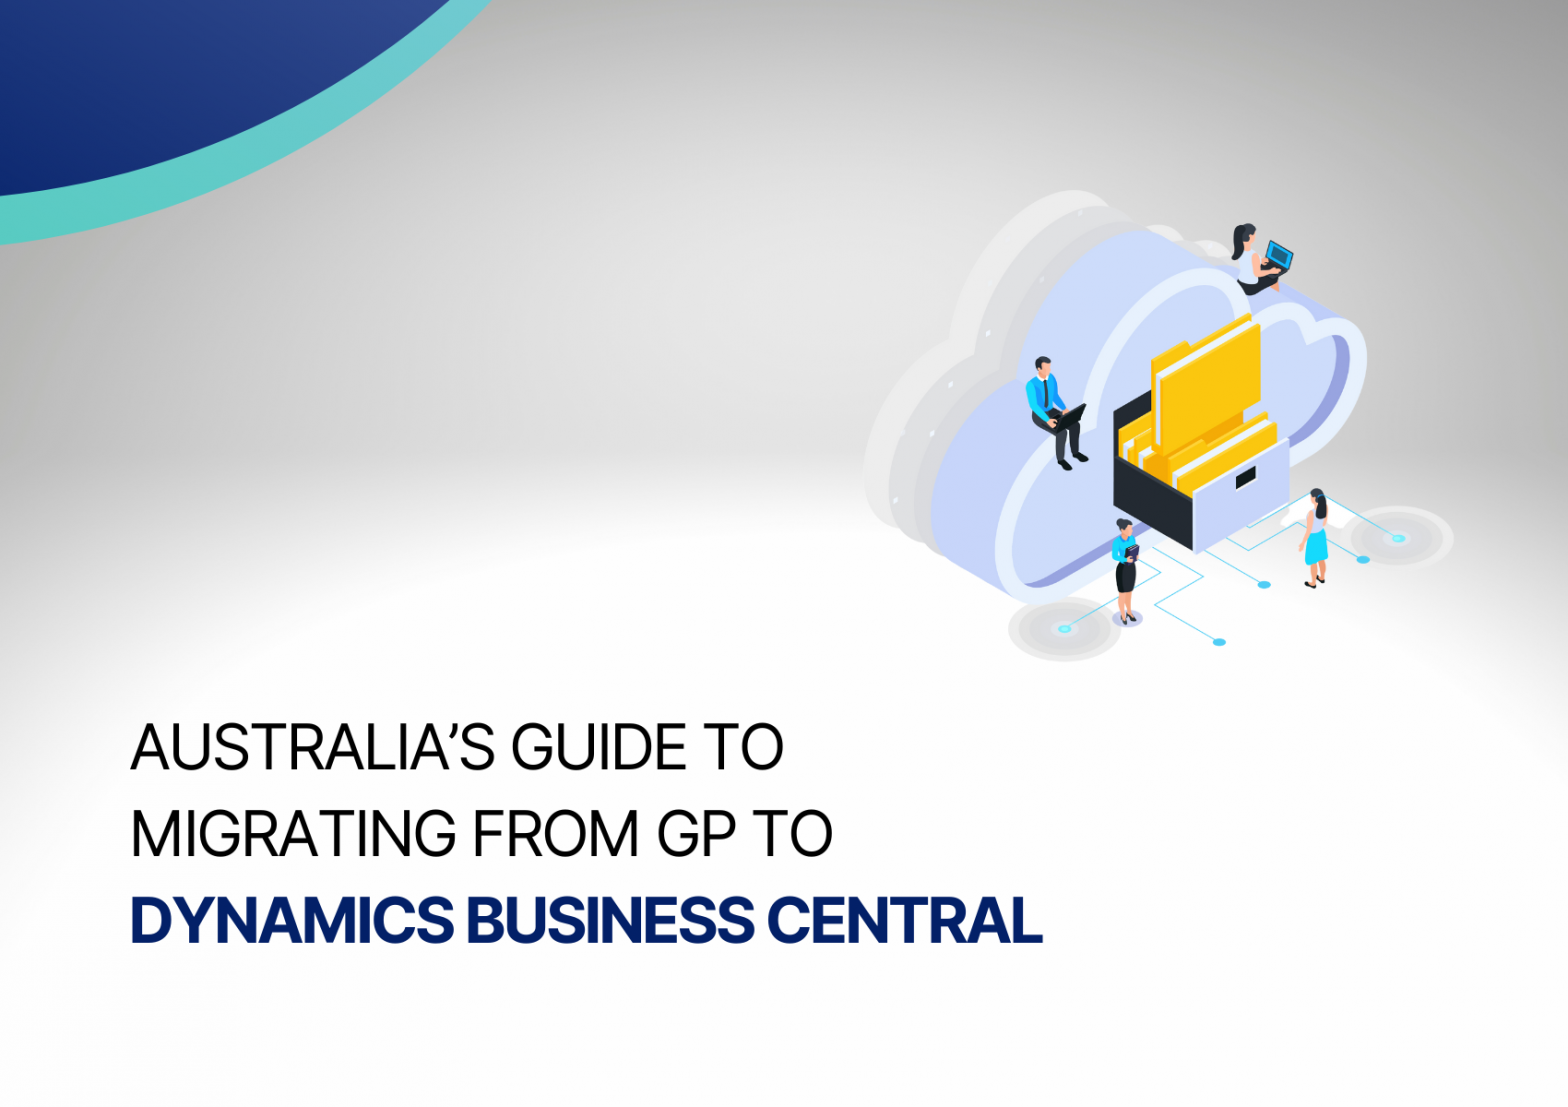 Key Differences Between Business Central and GP - Why Should You Migrate